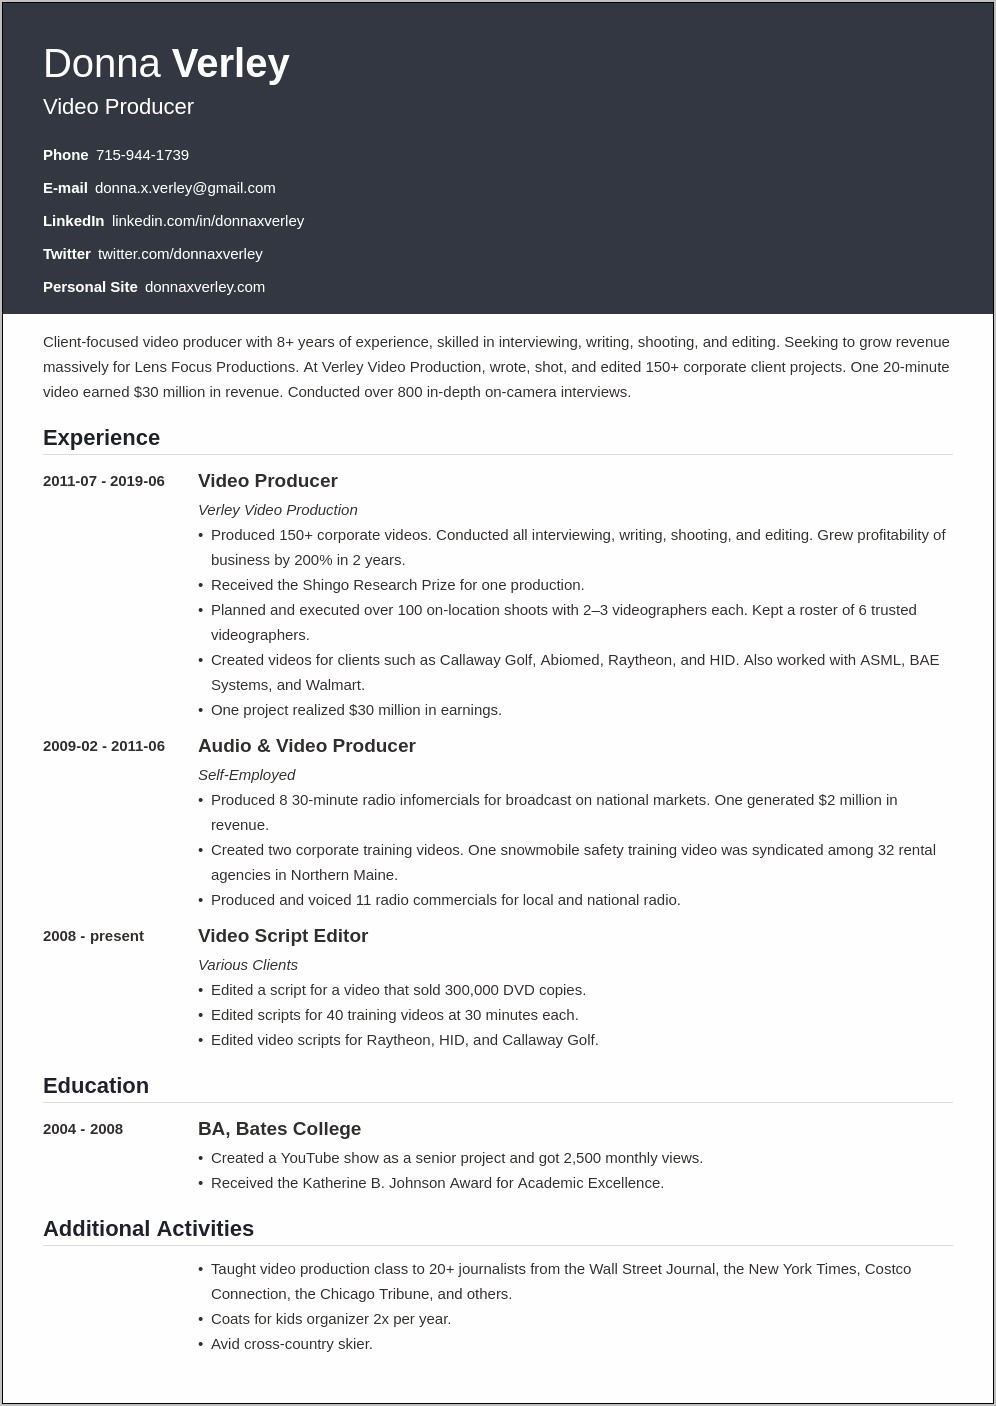 Sample Resume For Self Employed Consultant